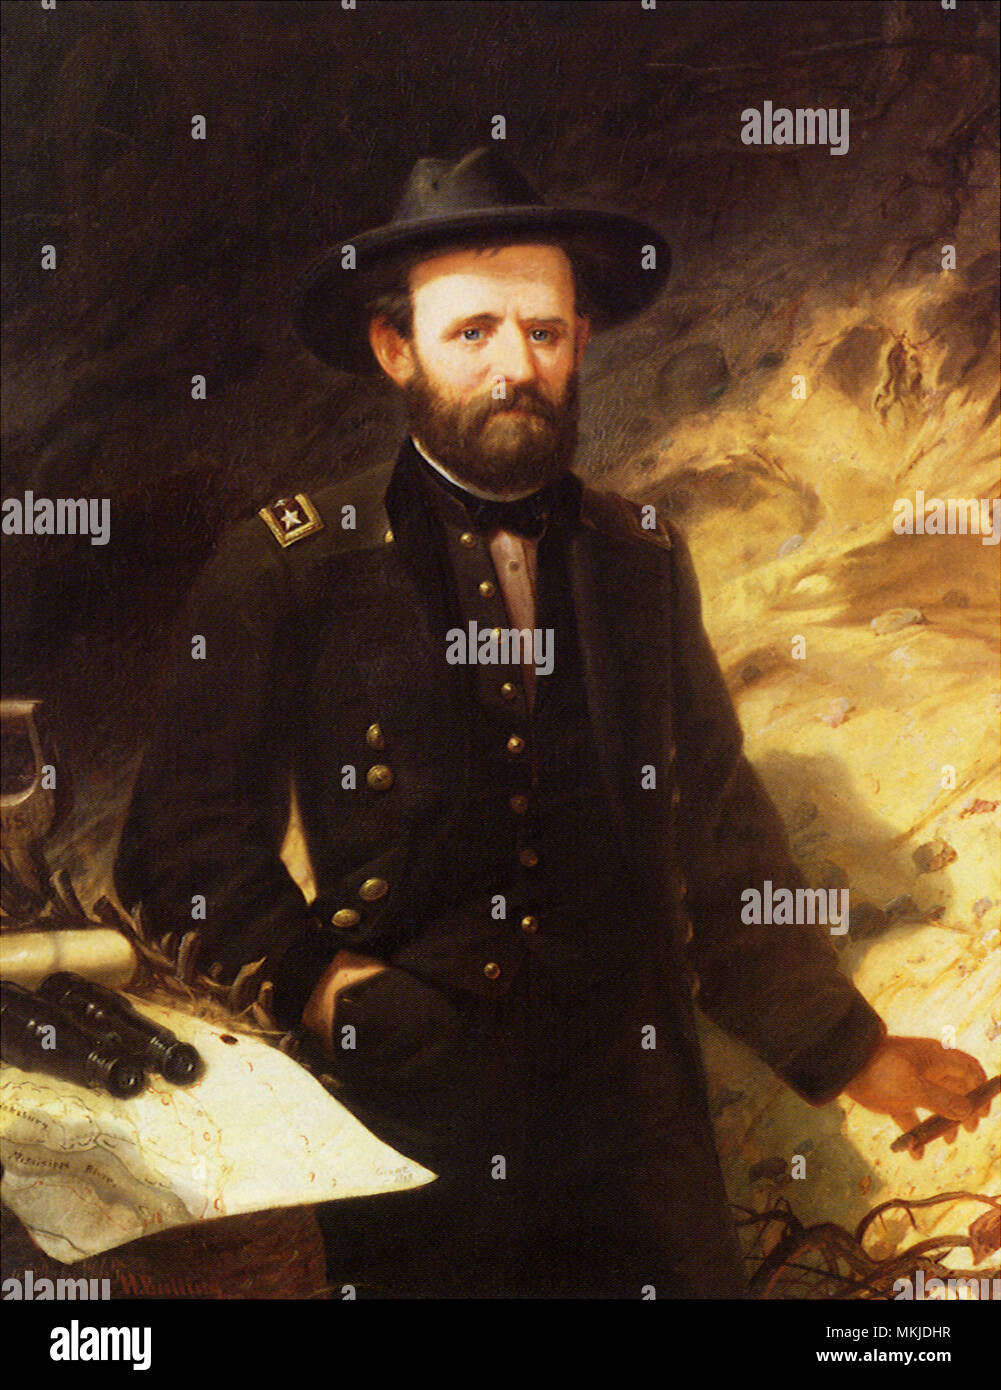 General Ulysses S. Grant in the Trenches Stock Photo